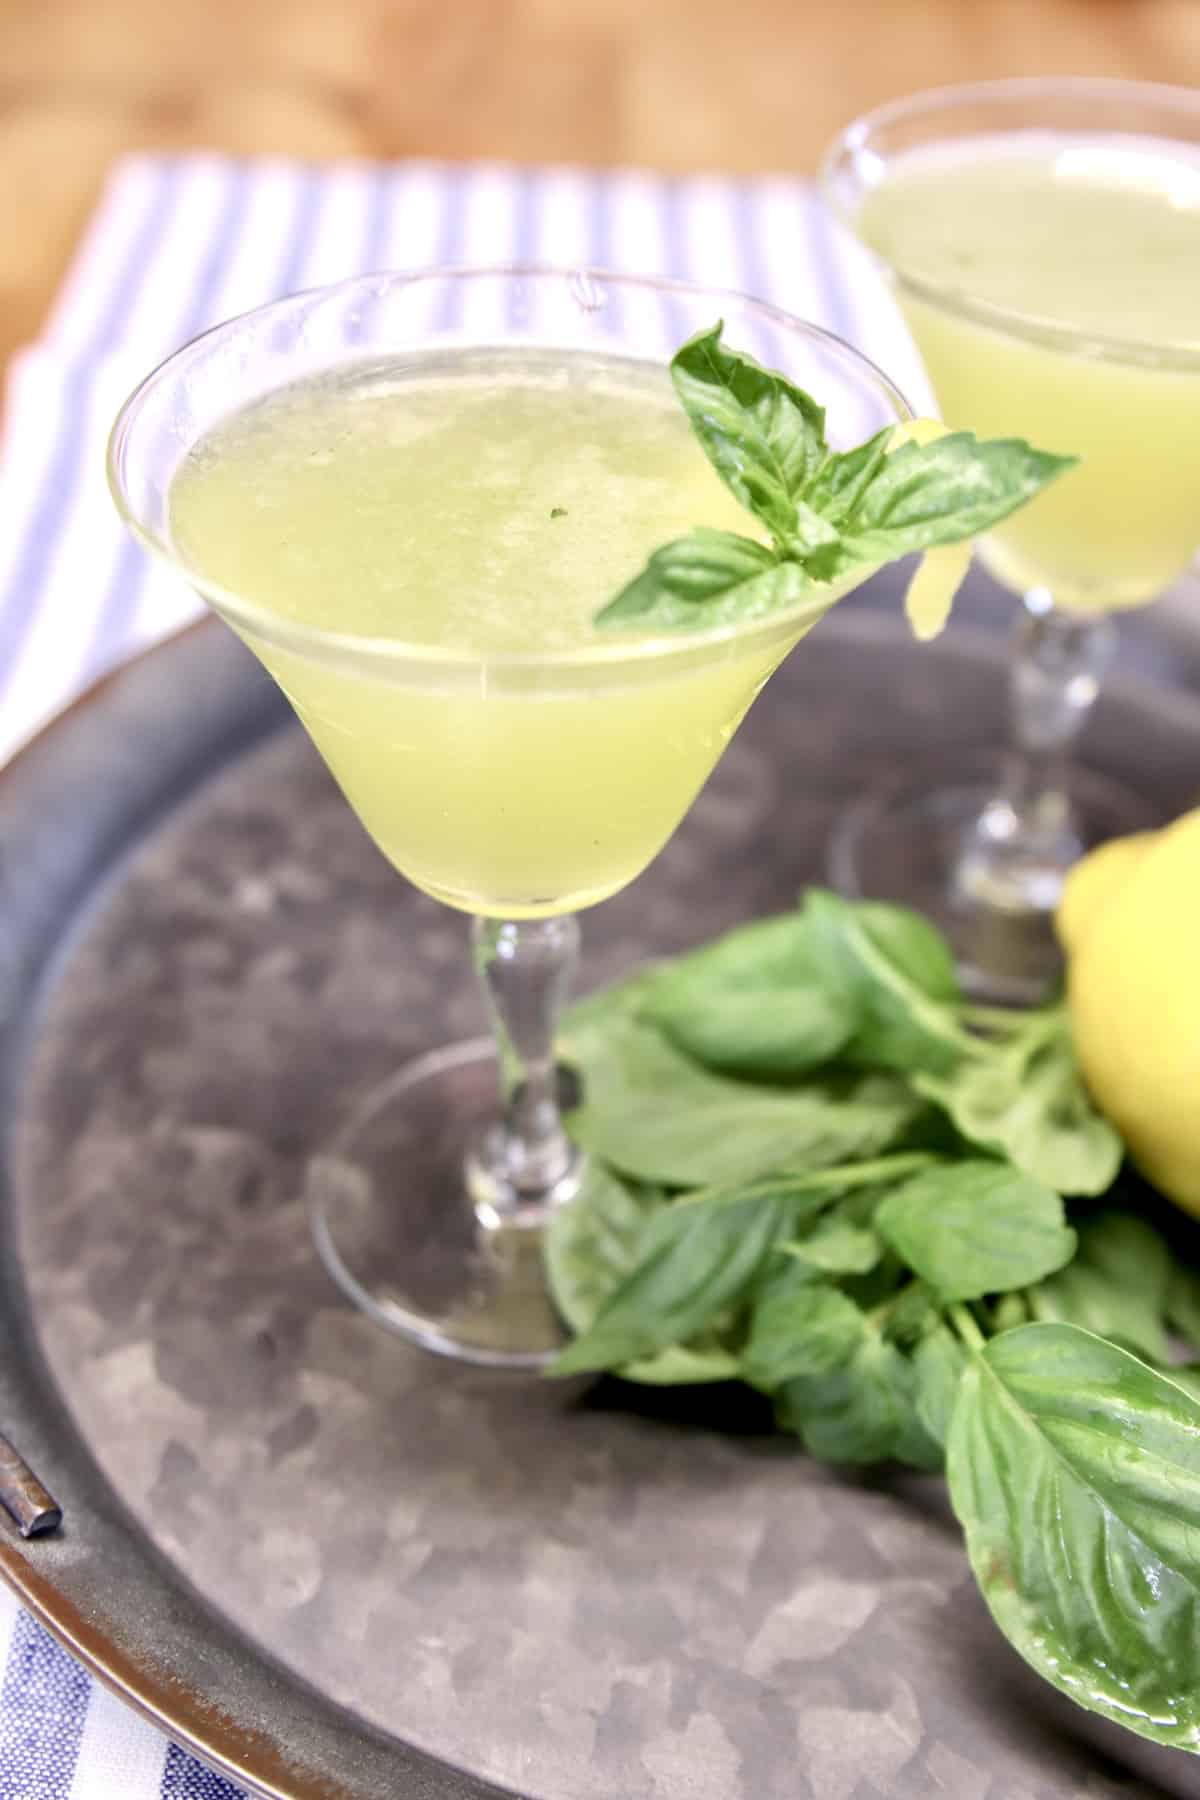 Coupe glass with lemon basil and gin cocktail.